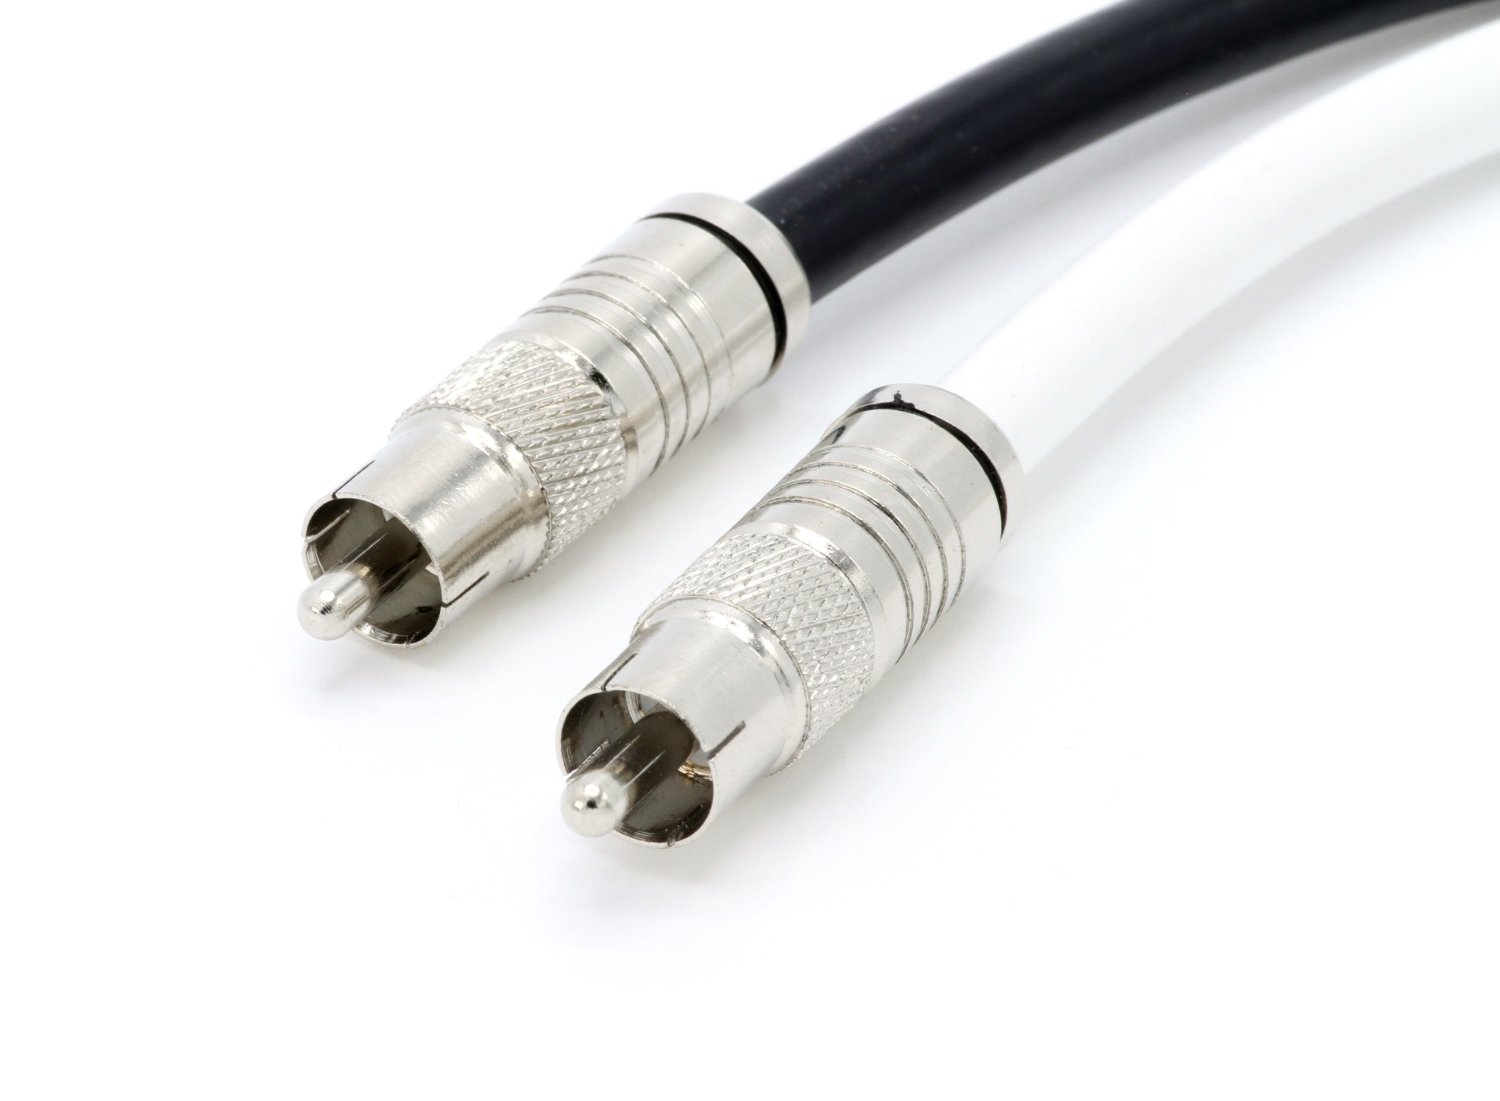 THE CIMPLE CO - White Digital Audio Coaxial Cable Subwoofer Cable - (S/PDIF) RCA Cable, 75 Feet - image 5 of 6